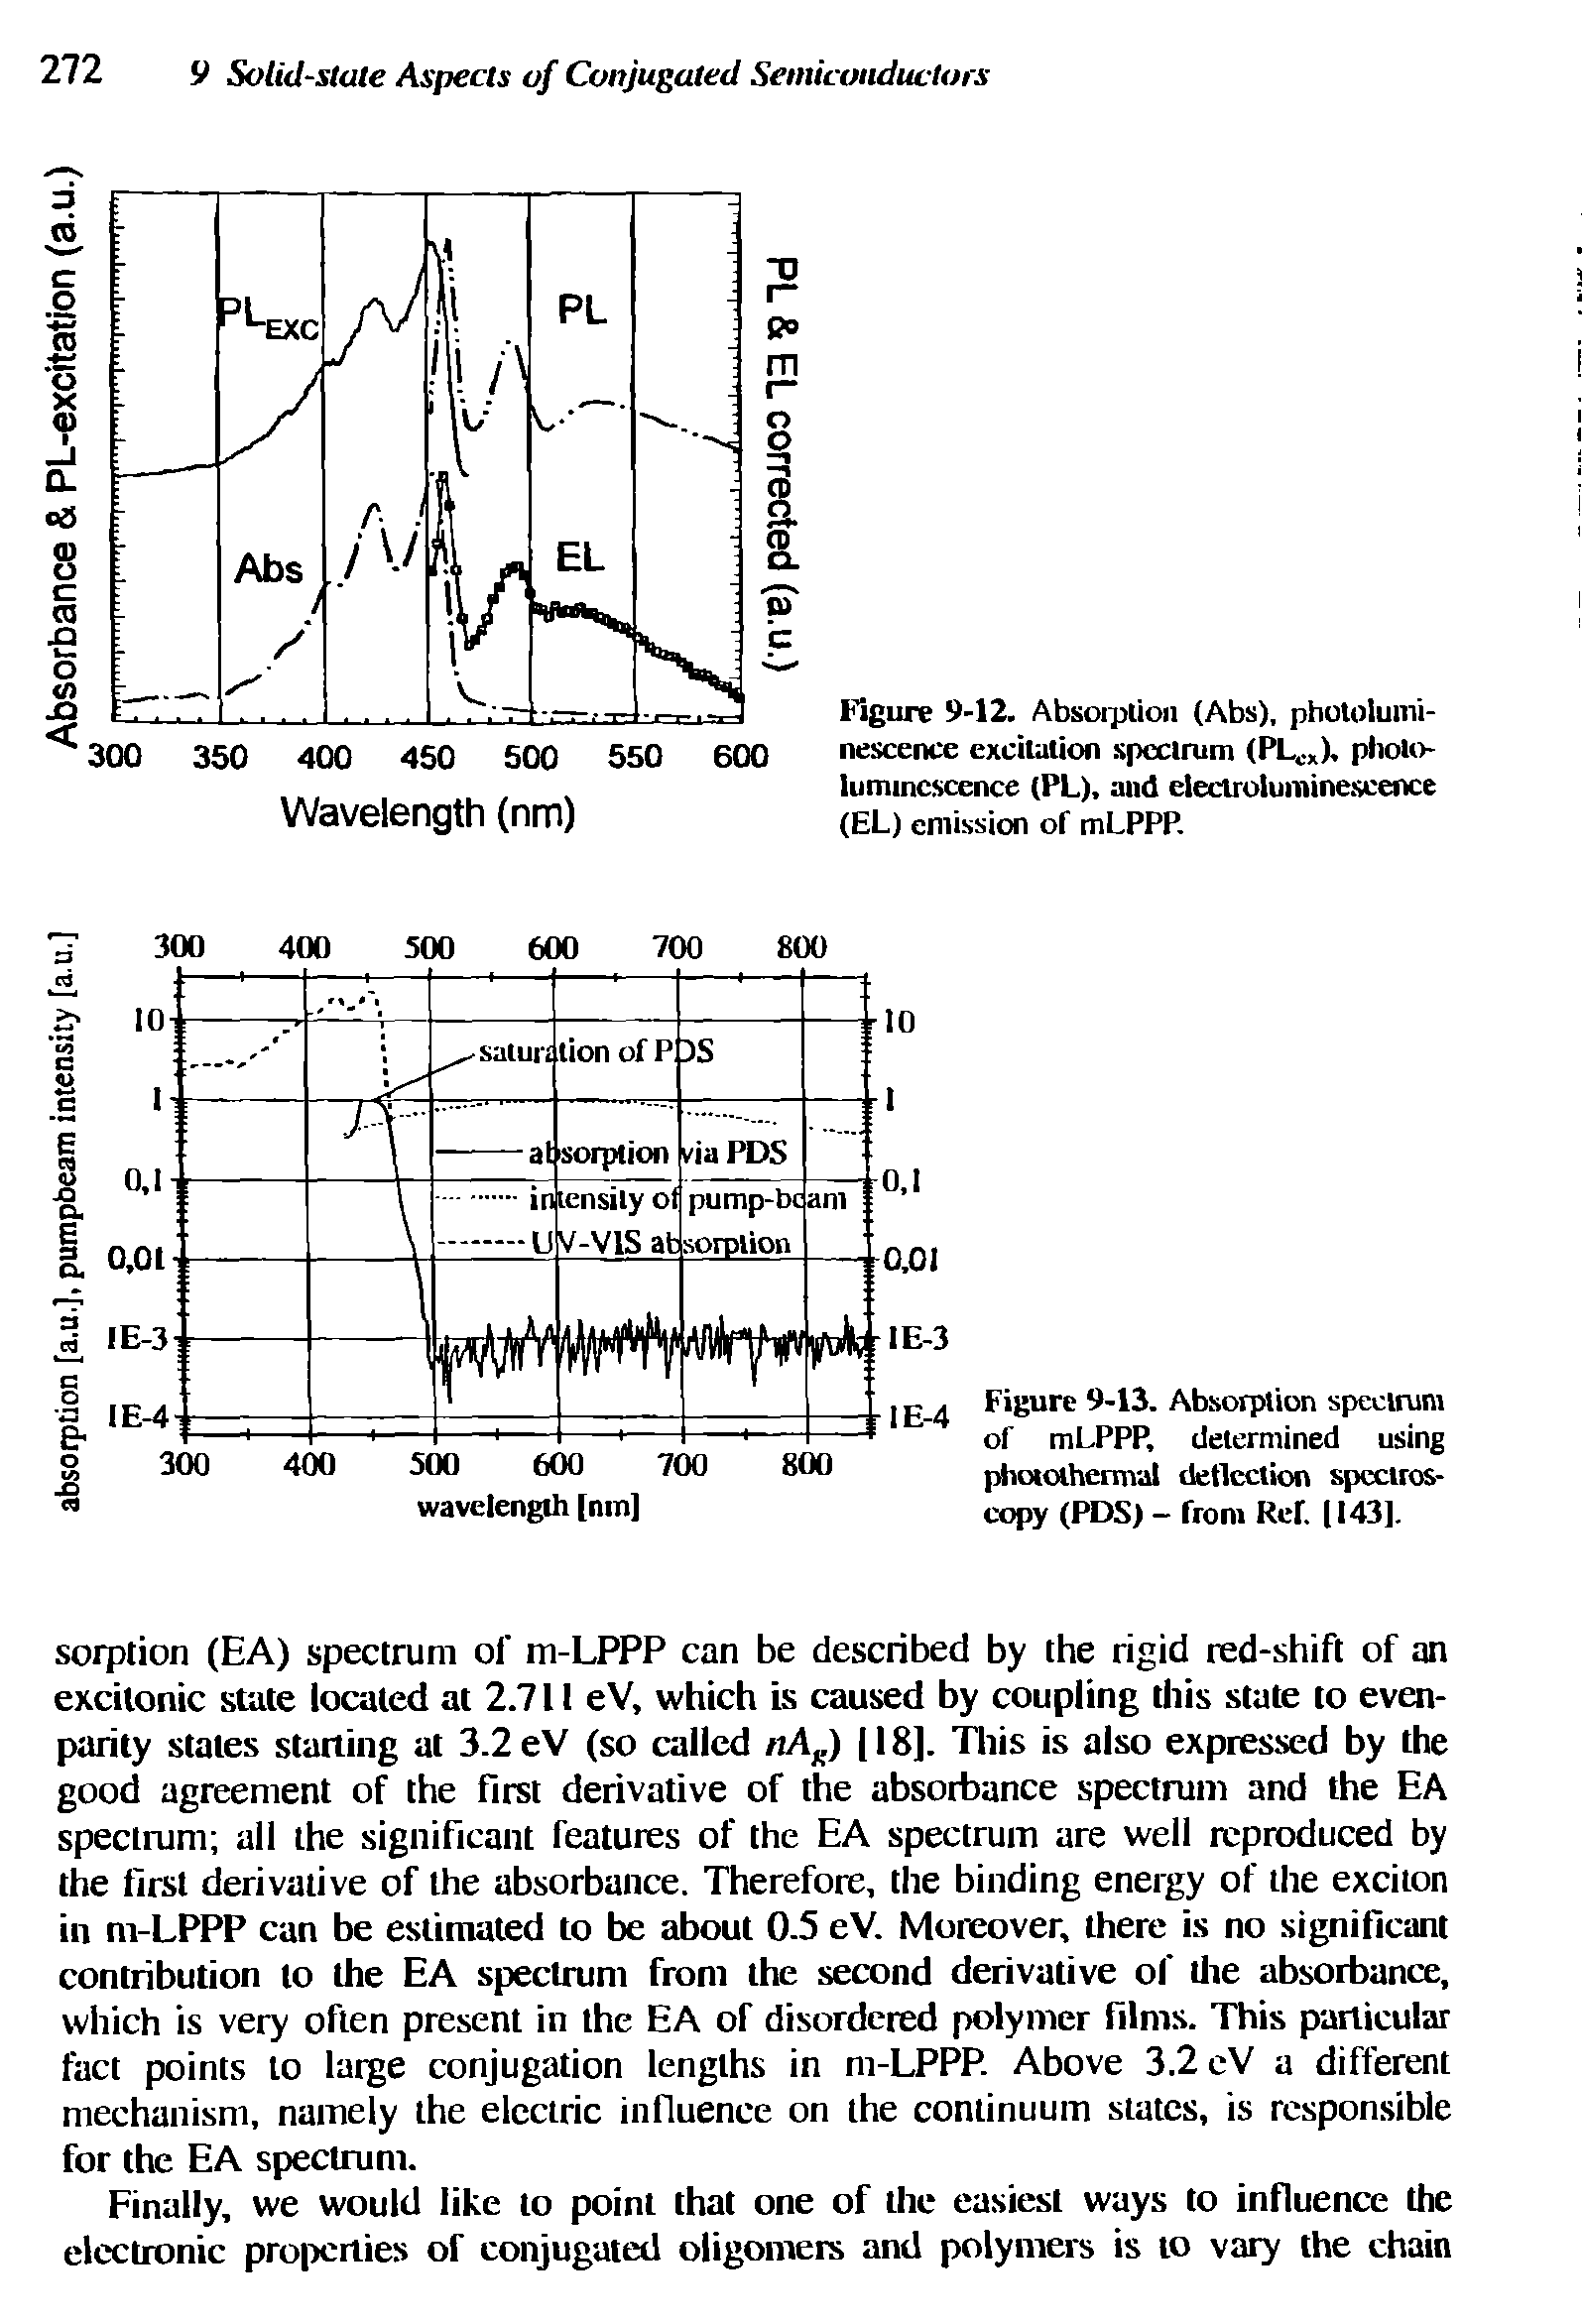 Figure 9-13. Absorption spectrum of mLPPP, determined using photolhermal deflection spectroscopy (PDS) - from Ref. [143].